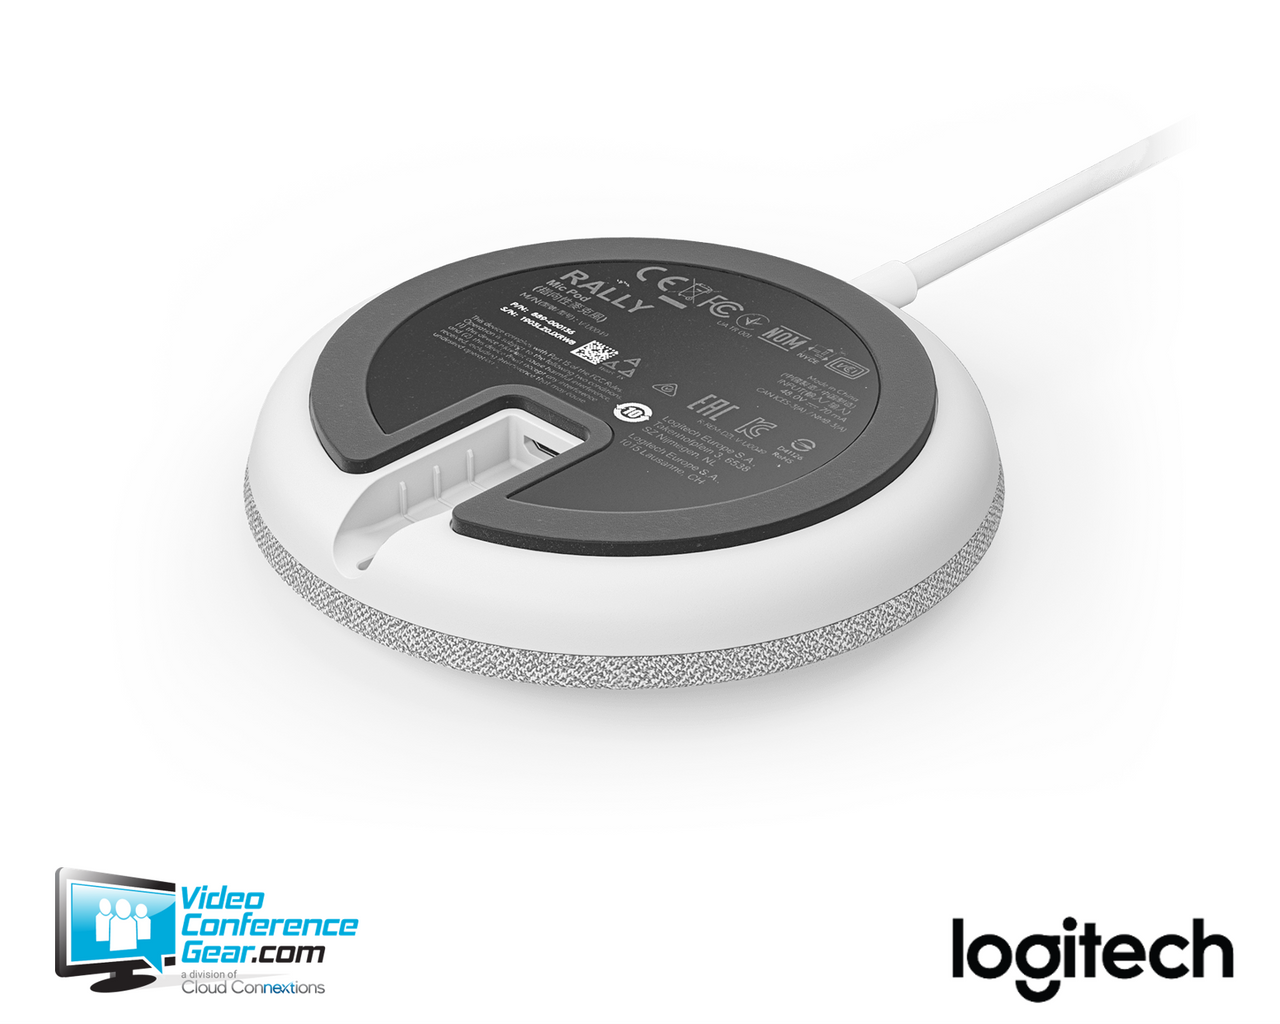 Logitech Rally Expansion Mic Pod - White (952-000038) for use with the Logitech Rally Conference Room Audio System including the Rally Bar Mini, Rally Bar and Rally Camera for full room coverage.